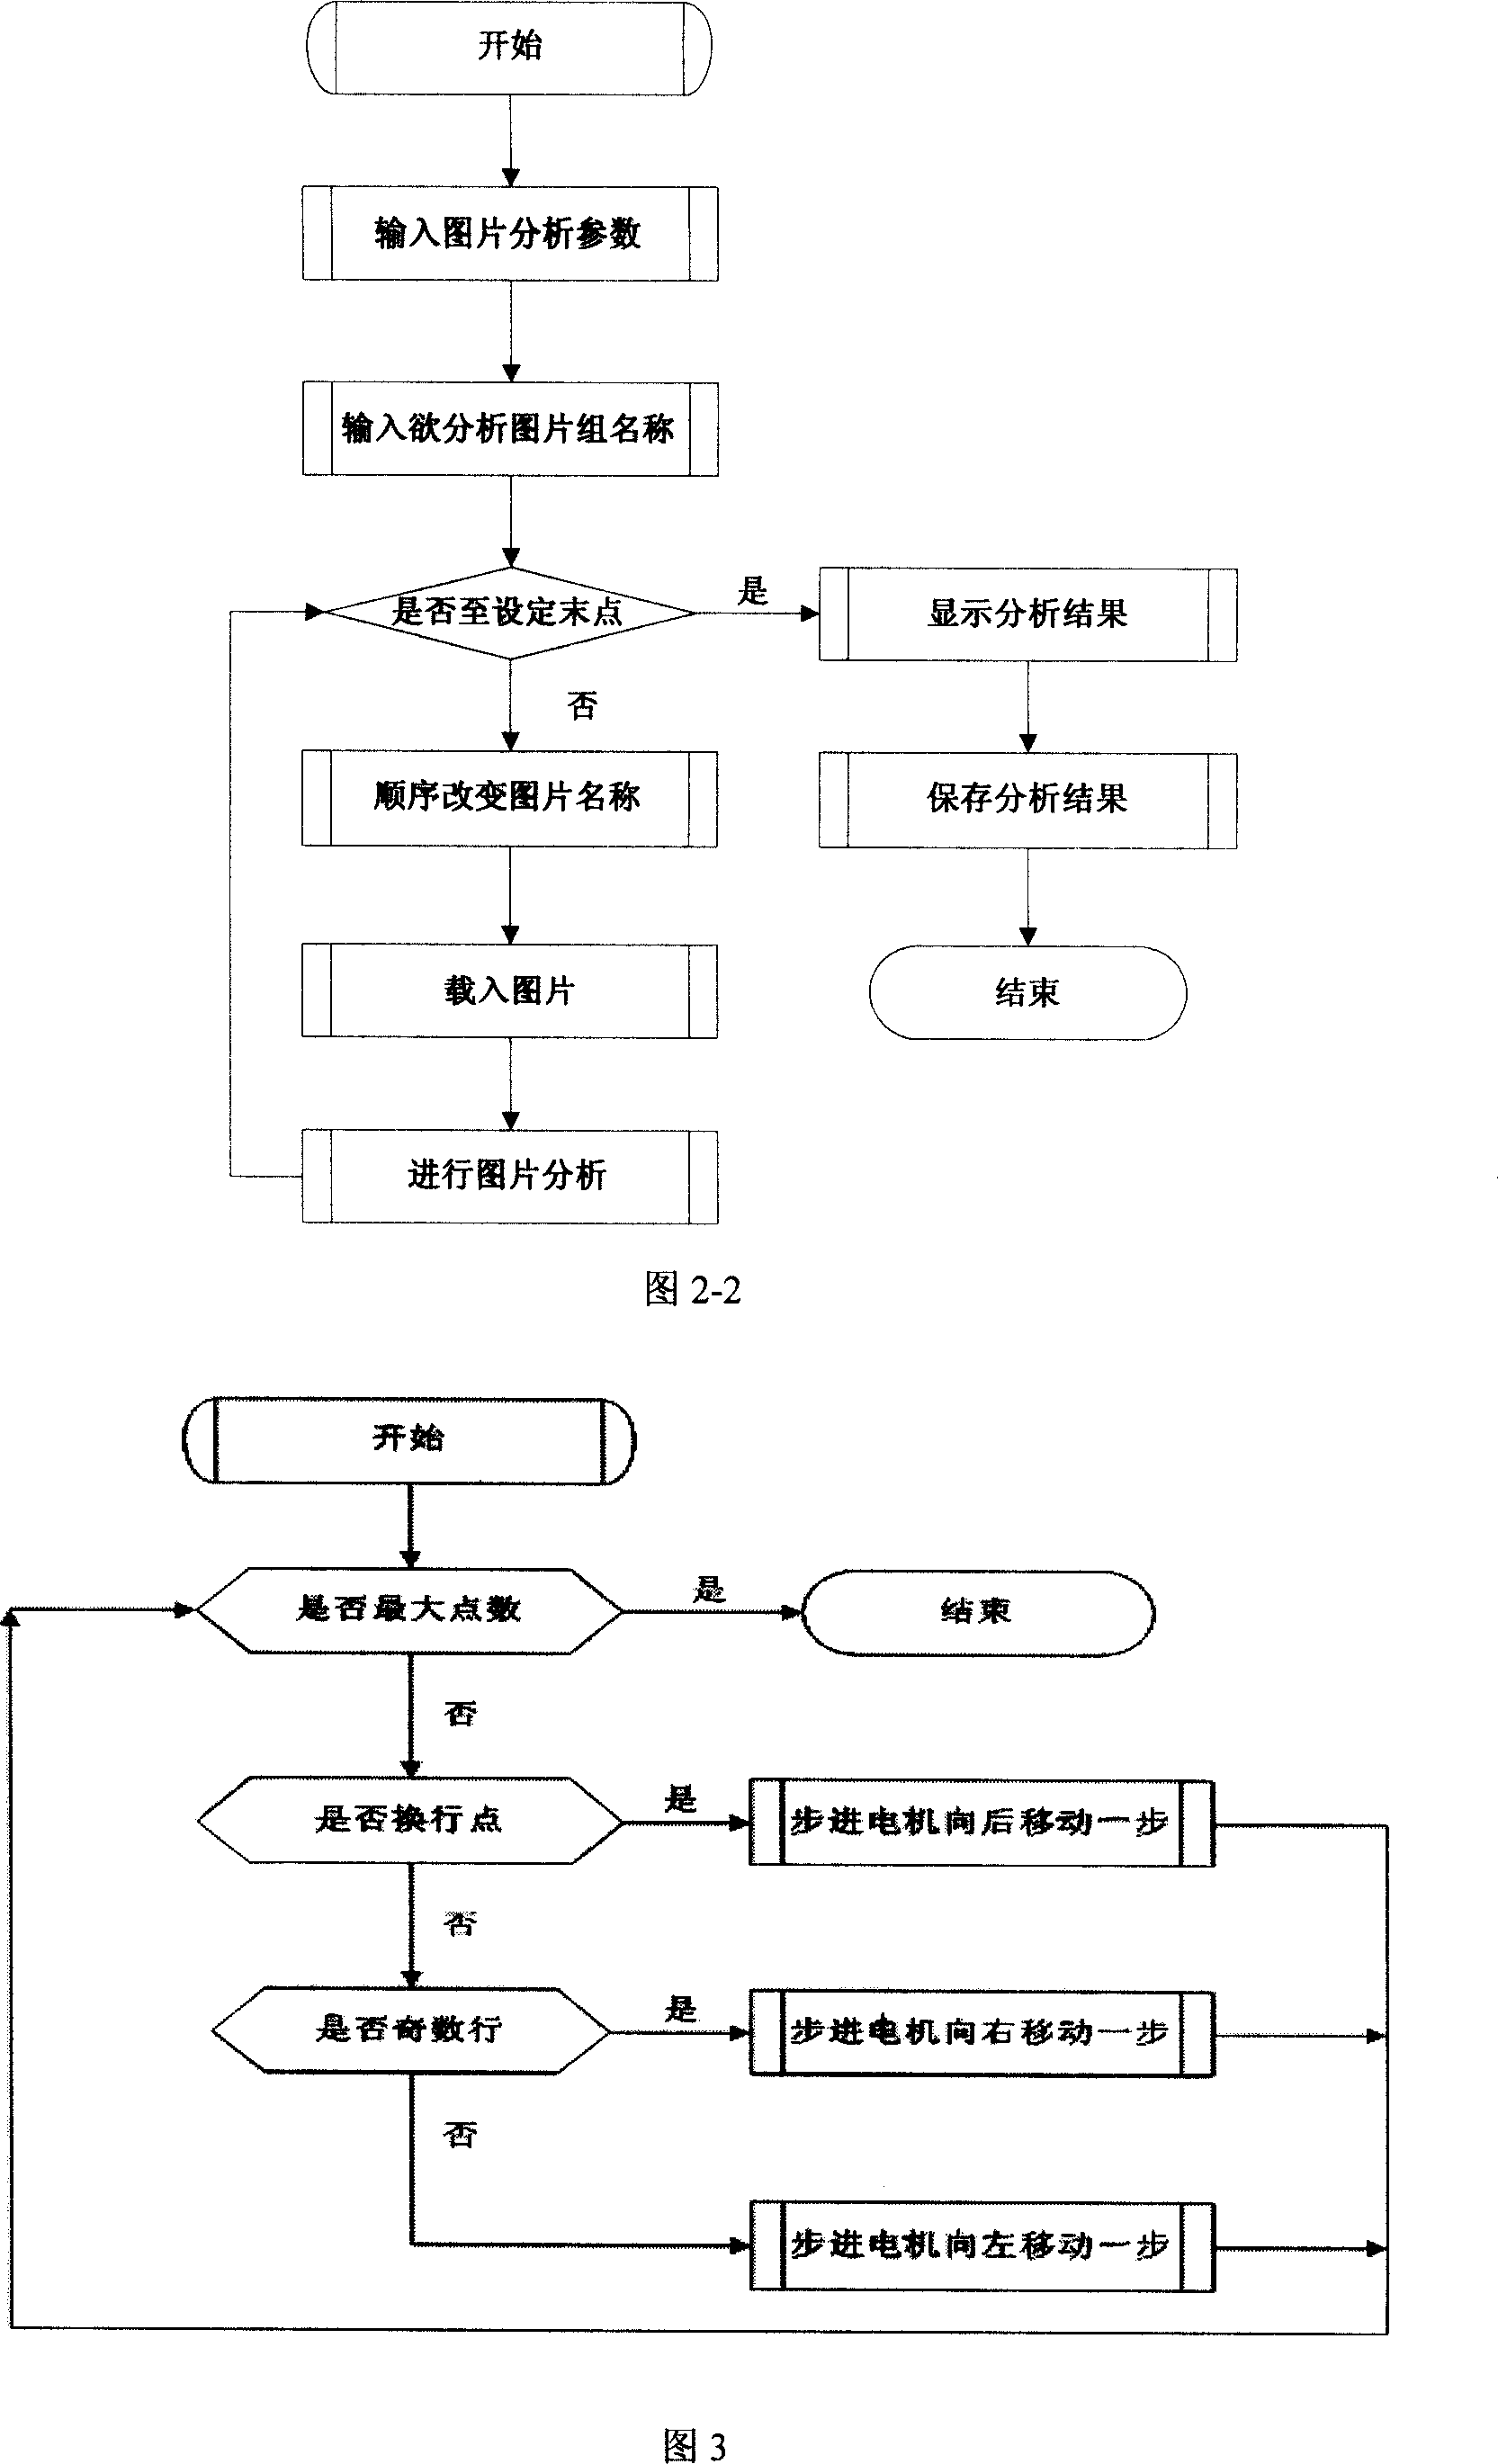 Charred coal porosity measuring equipment and measuring method thereof